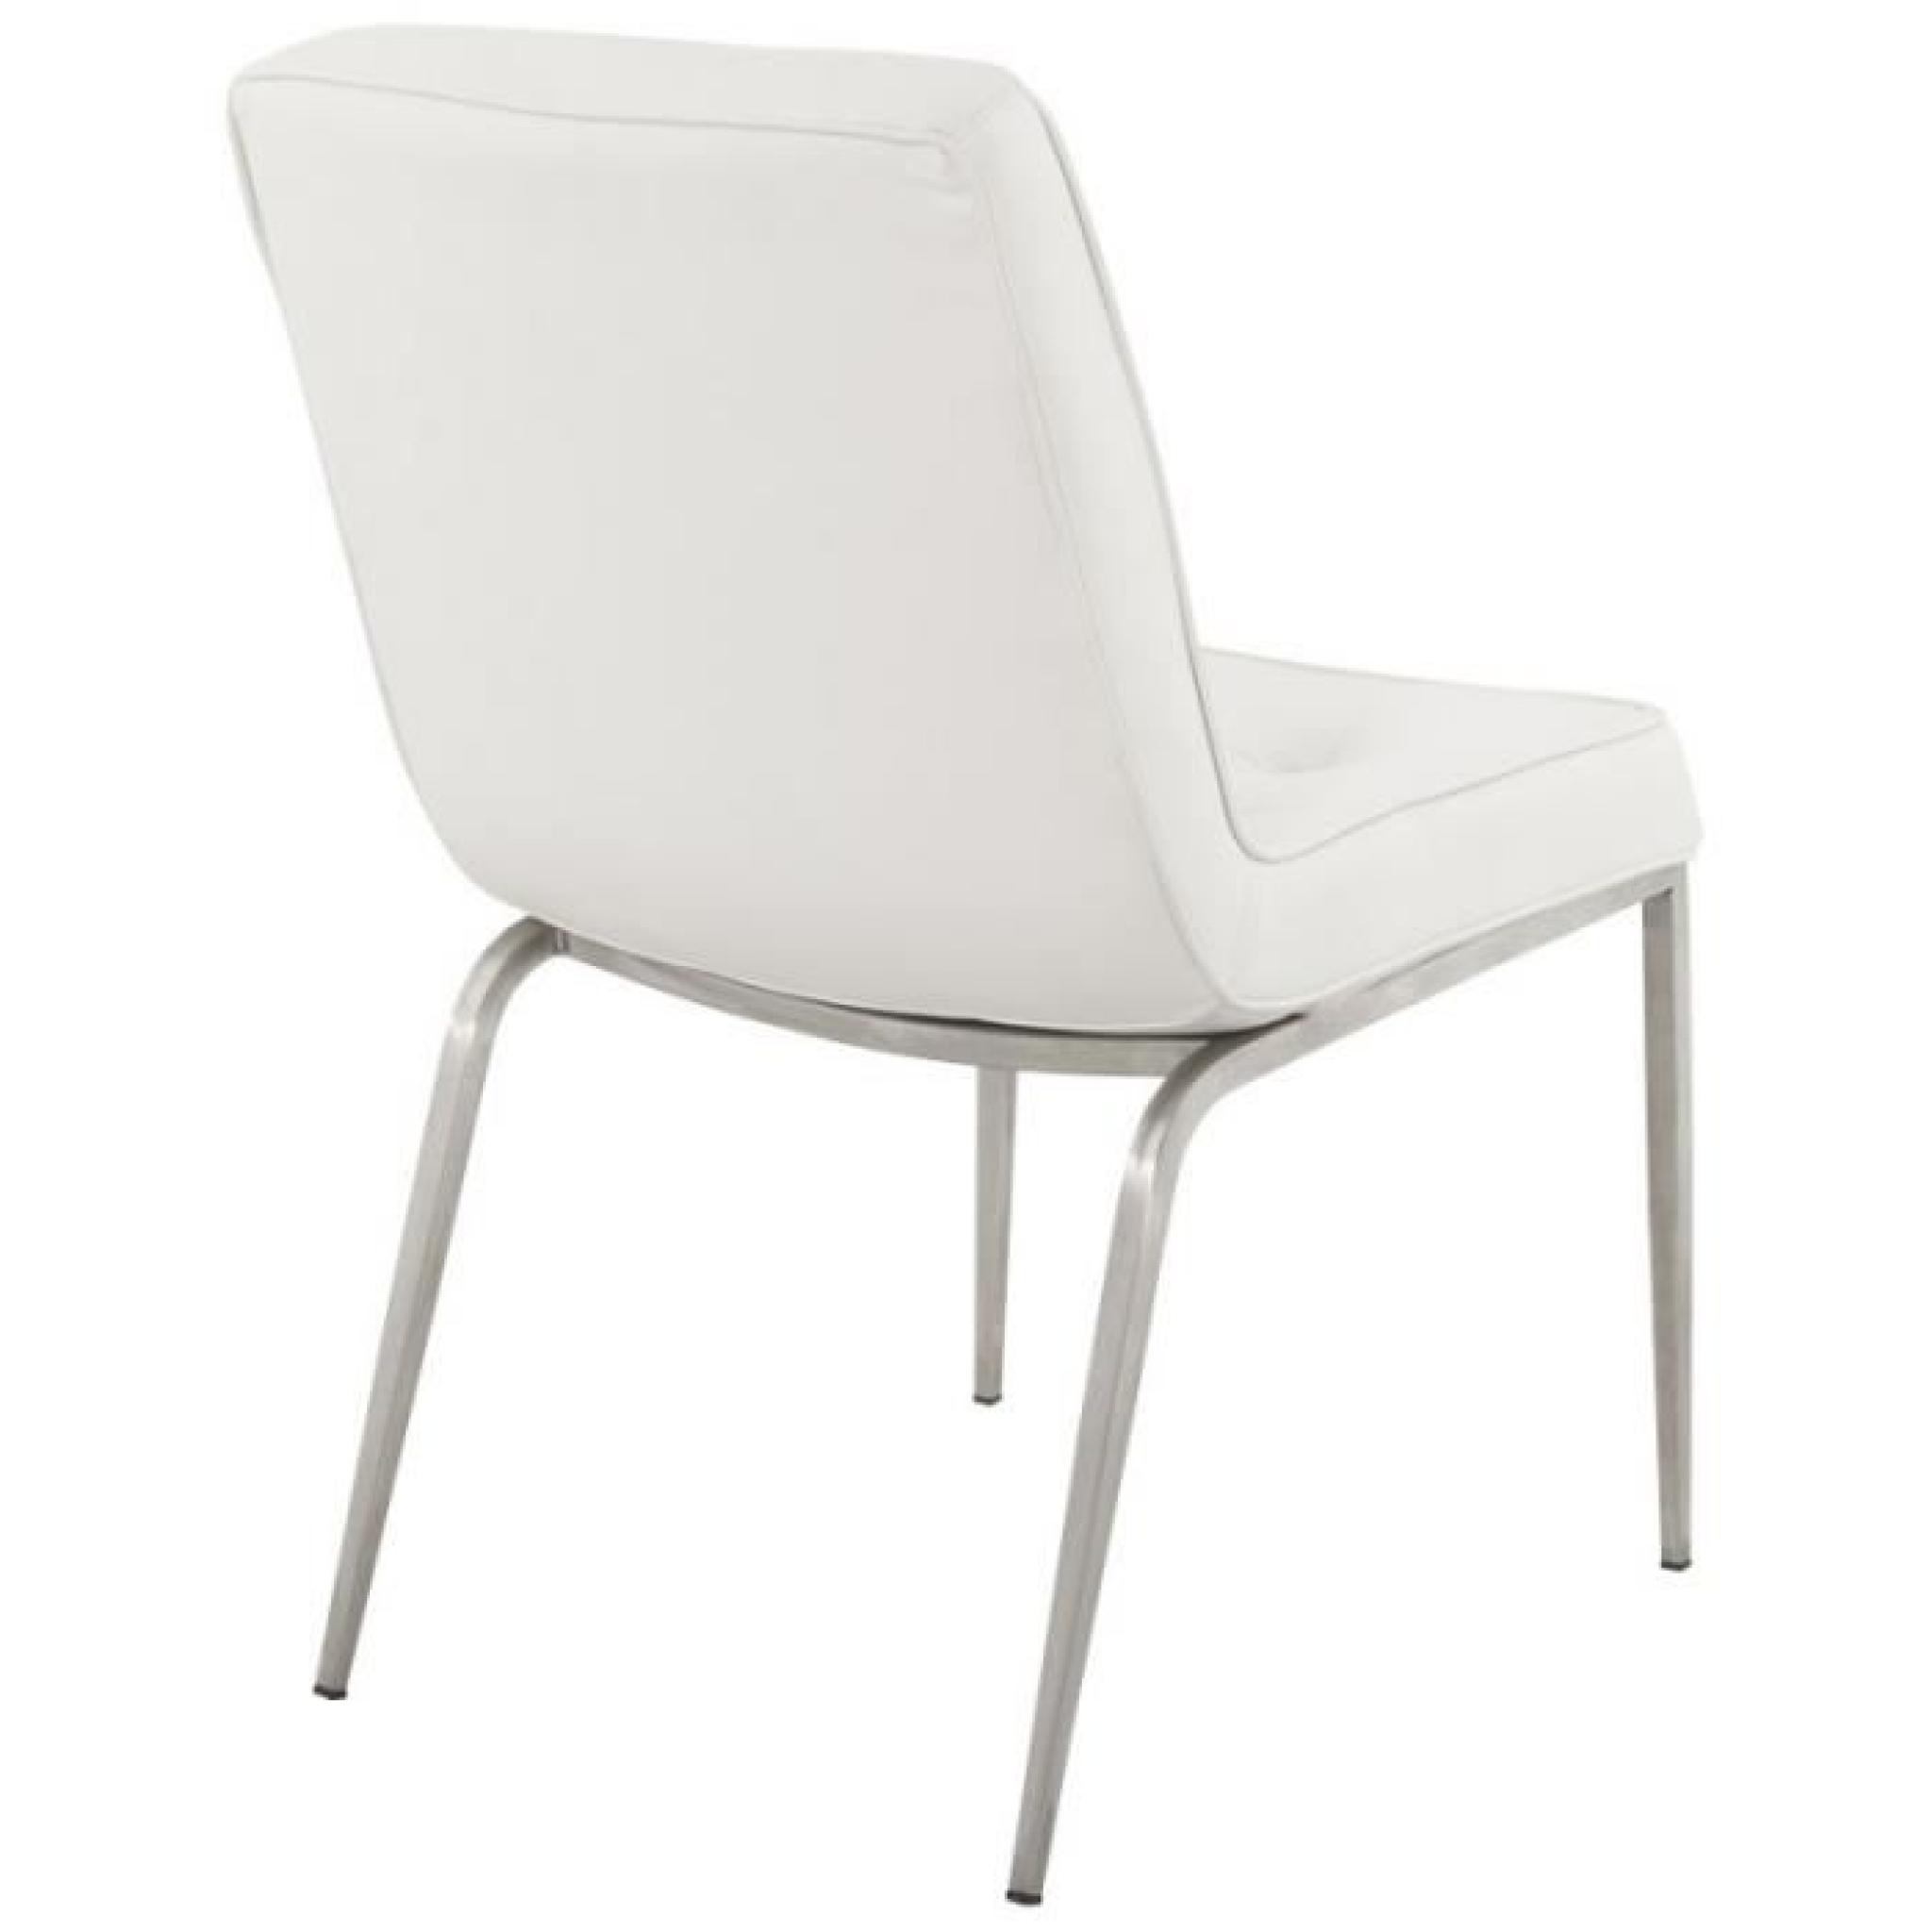 CHAISE MADRID DESIGN BLANCHE pas cher